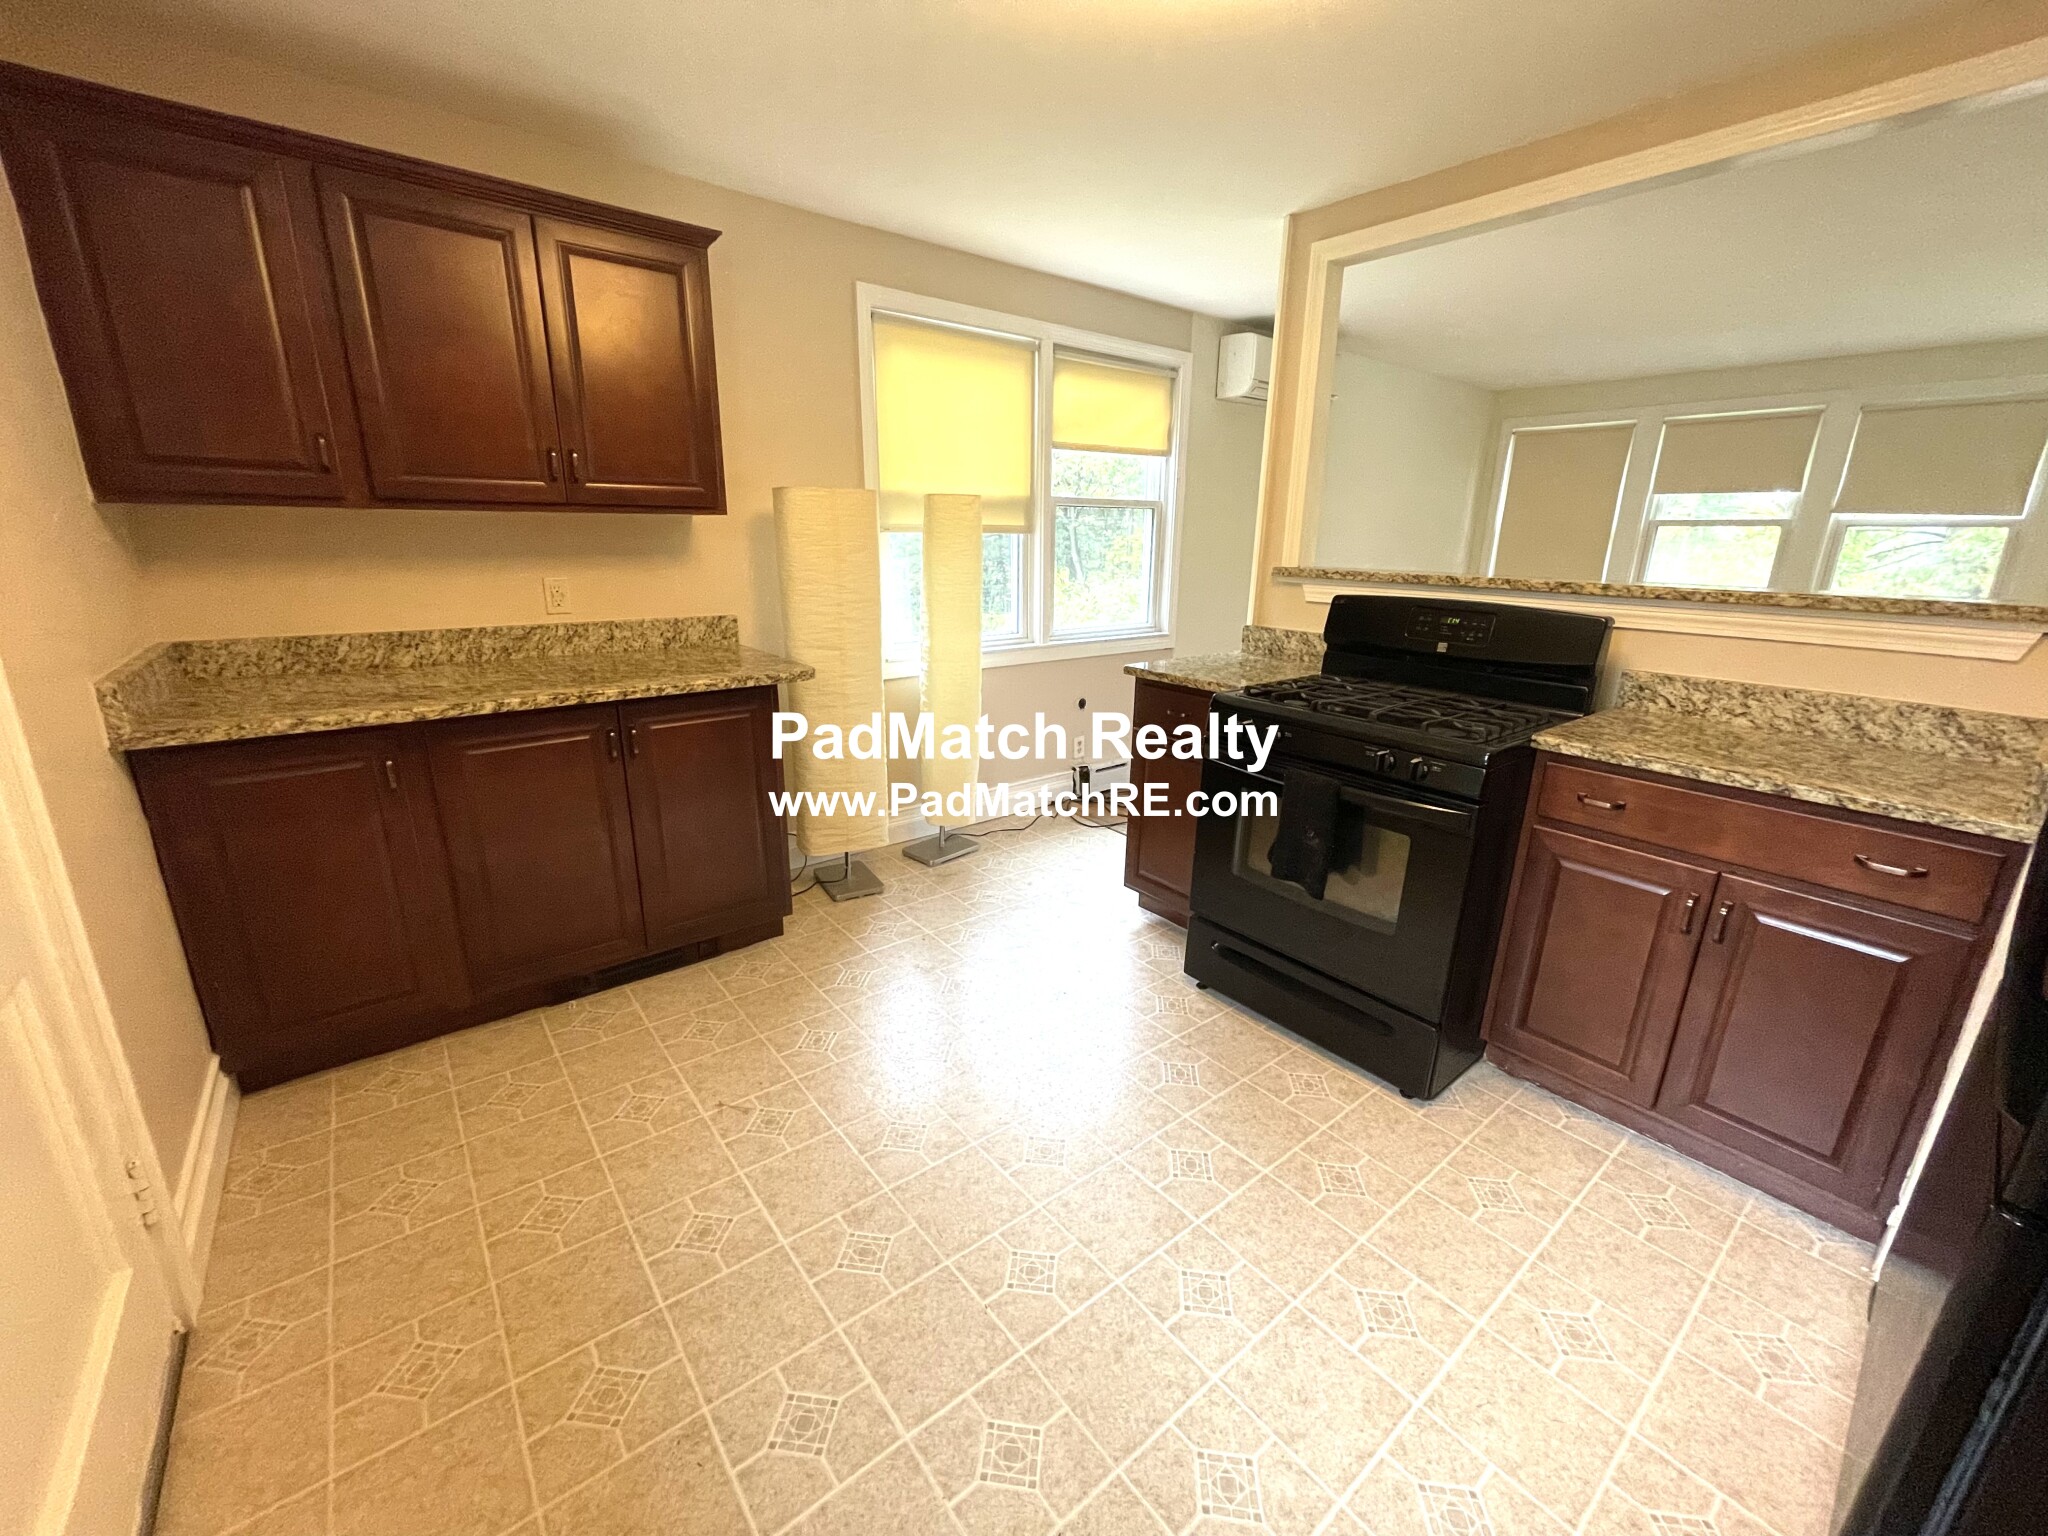 2 Beds, 1 Bath apartment in Randolph for $2,700